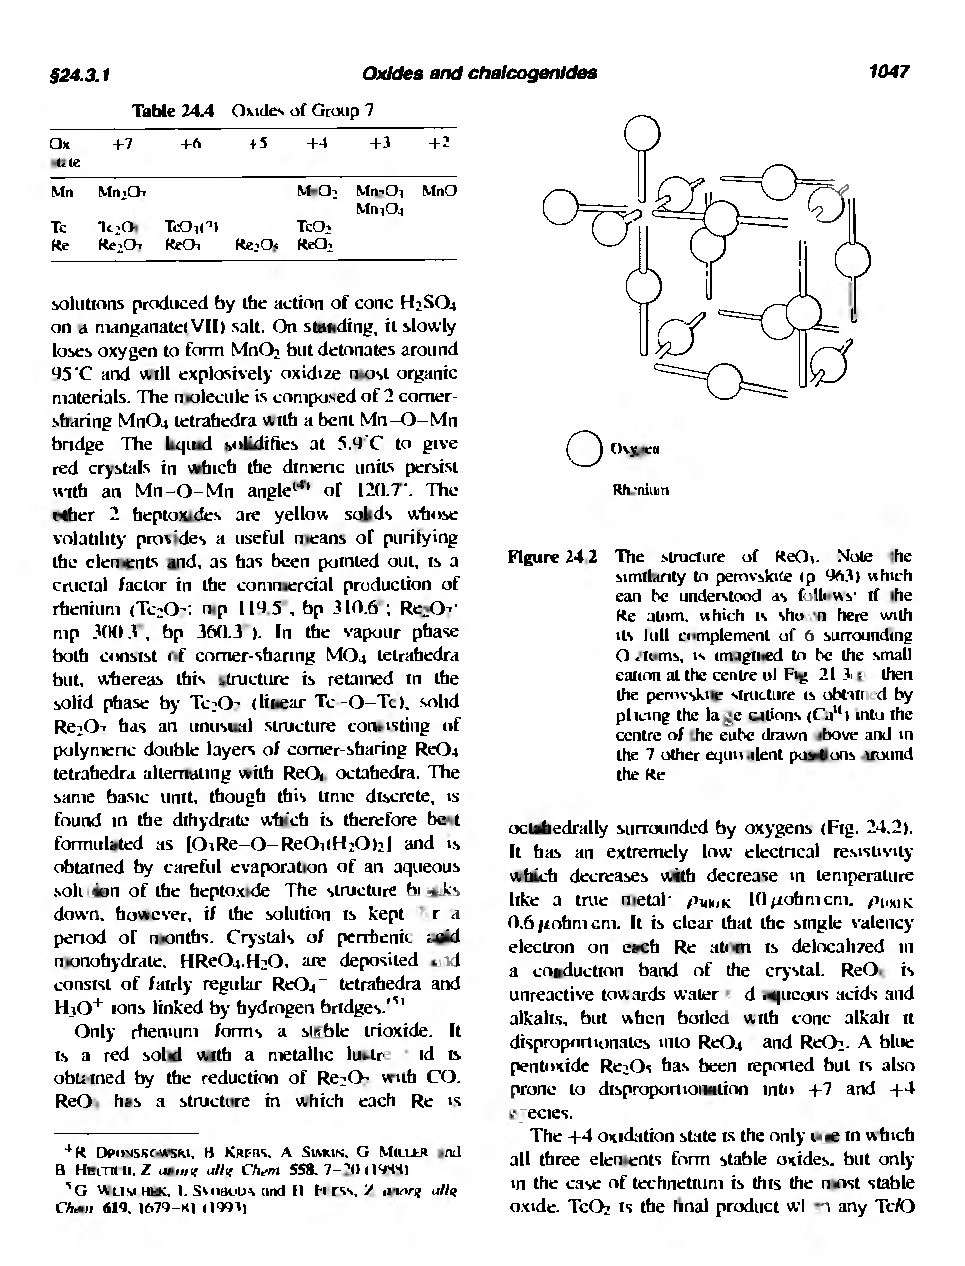 Figure 24 2 "The structure of ReOi. Mule the simihinty to pemvskice ip 46,1) which ean be understood as follows if the Ke atom, which is shu -n heie with Its lull complement of 6 SLirrounding O < i( ms, is imjgiiaed to be the small canon at the centre ul Fi 21 3> ( then the pemvskue slructiire is obtaii d by plicing the lage cations (Ca"i into the centre of die cube drawn <bove and in the 7 other equiialent paa ons siuund the Ke...